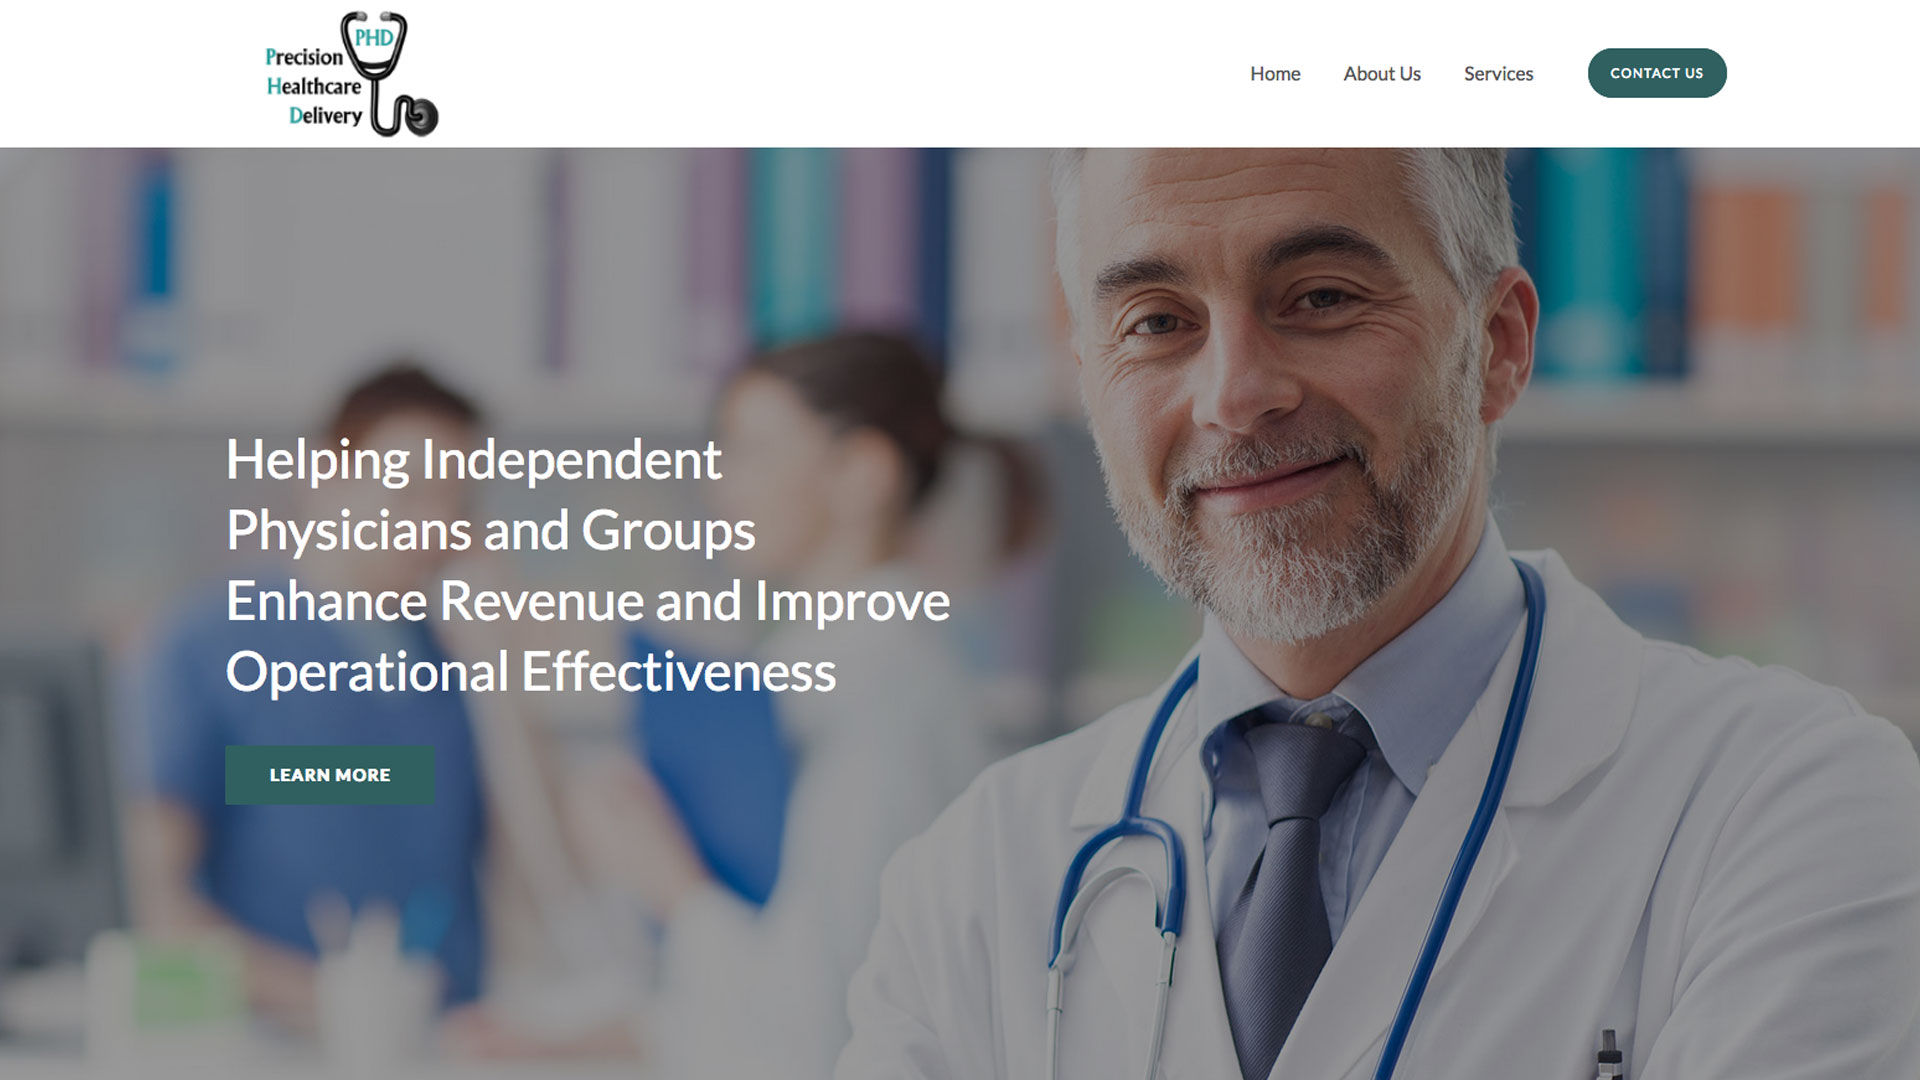 Precision Healthcare Delivery website home page image